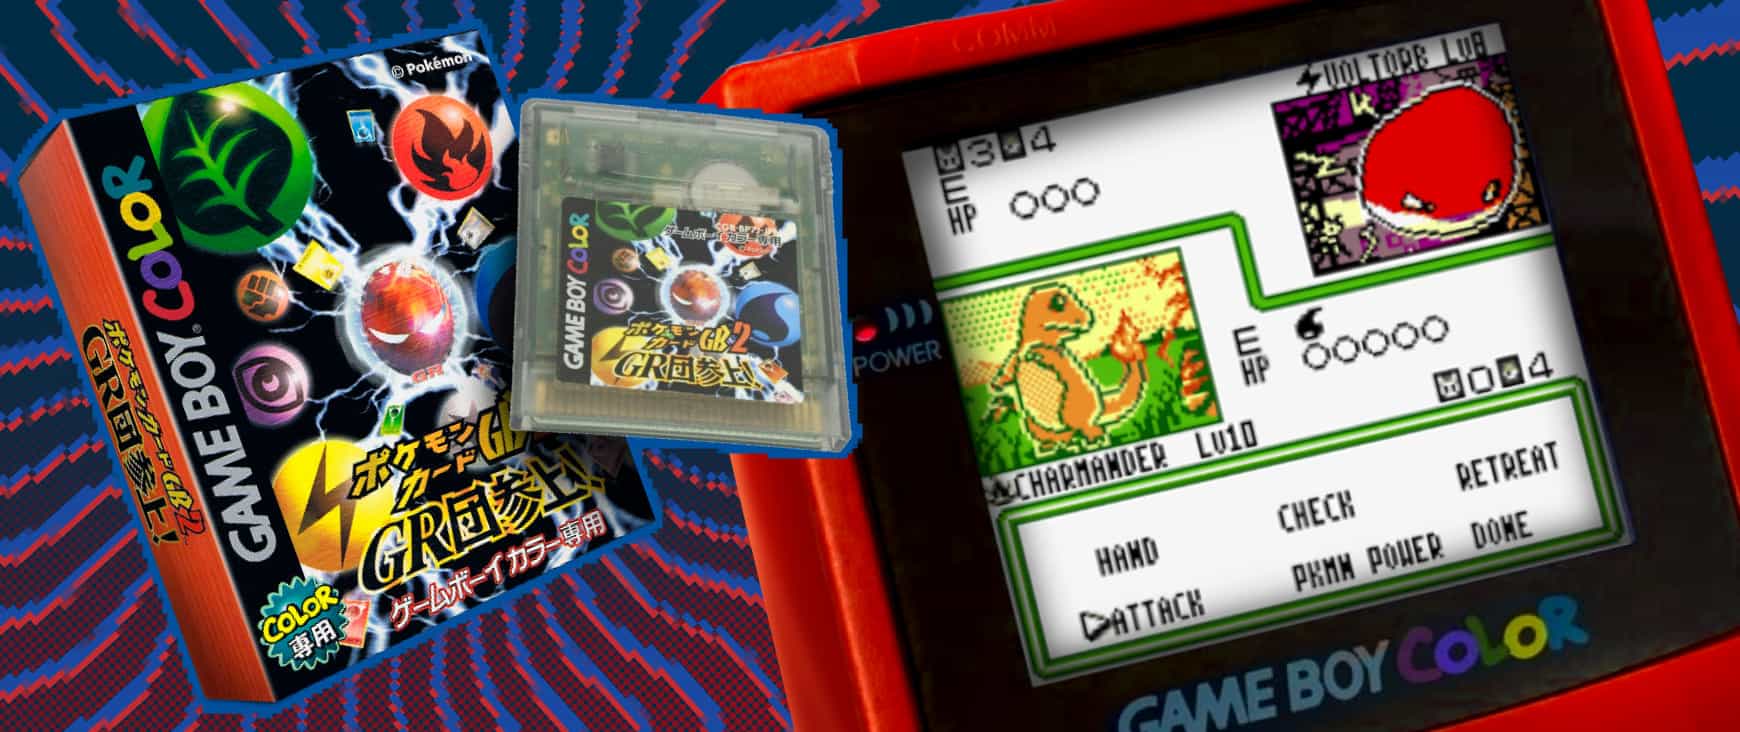 Japan only Pokémon Card GB2: Here Comes Team GR! for Game Boy Color